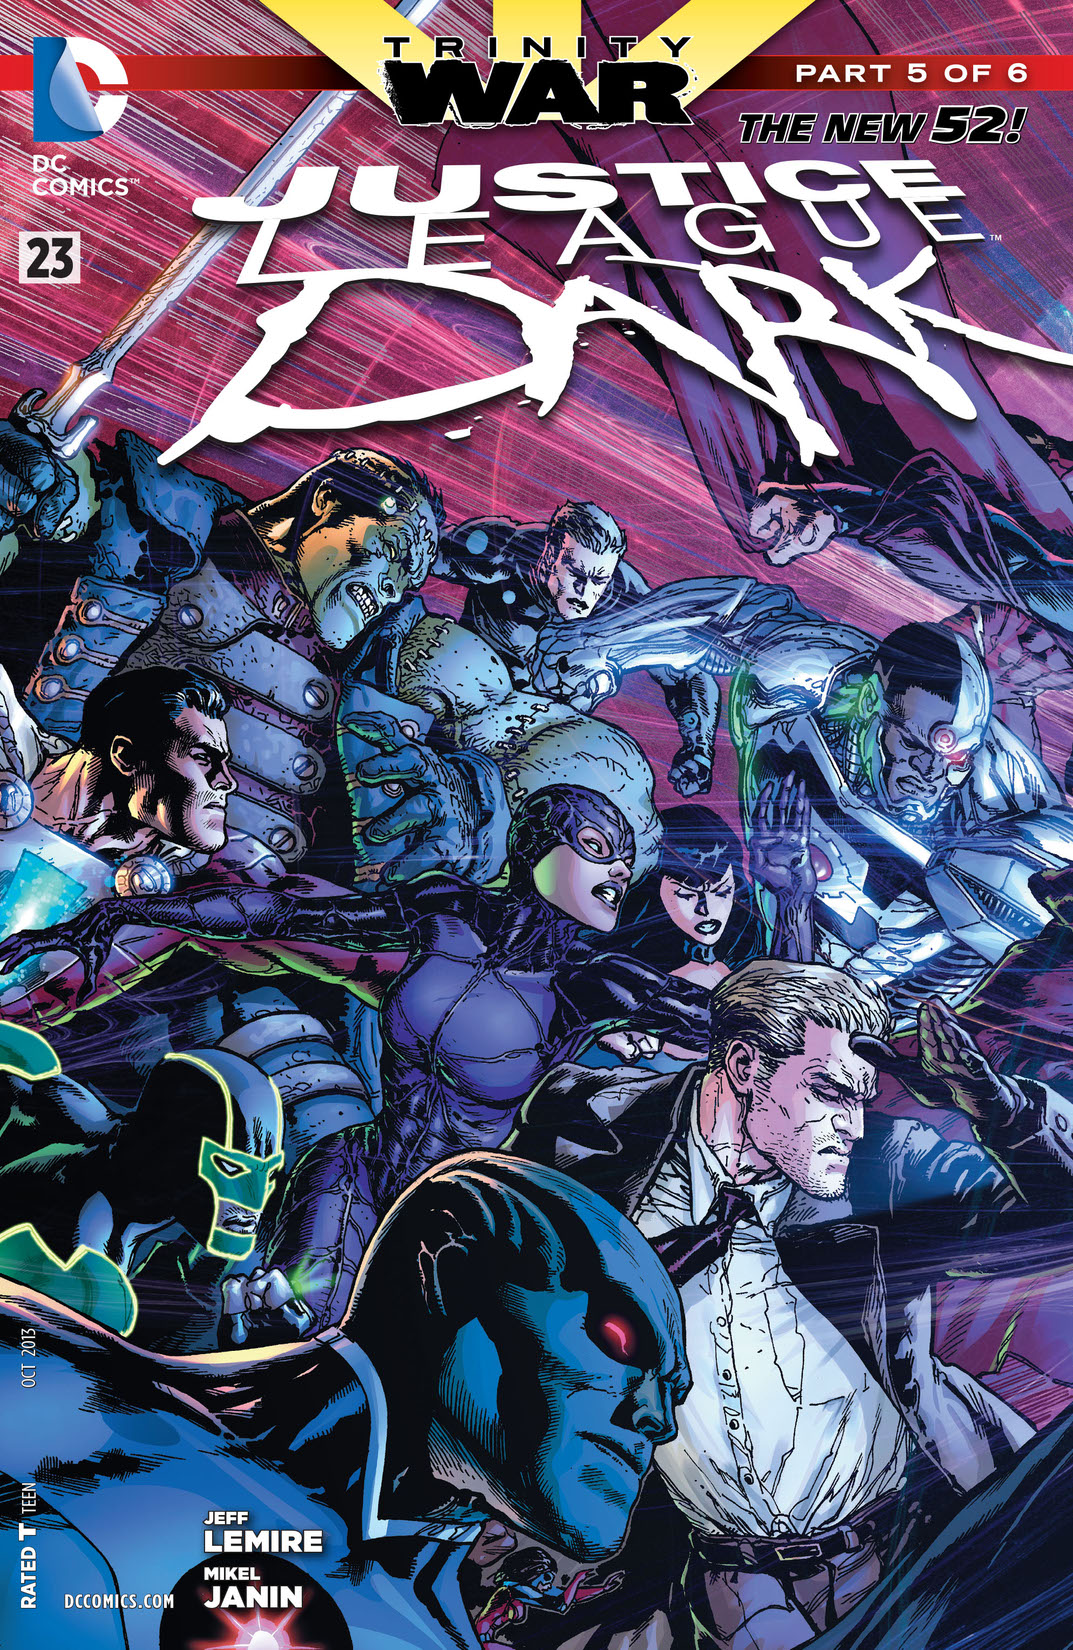 Justice League Dark (2011-) #23 preview images